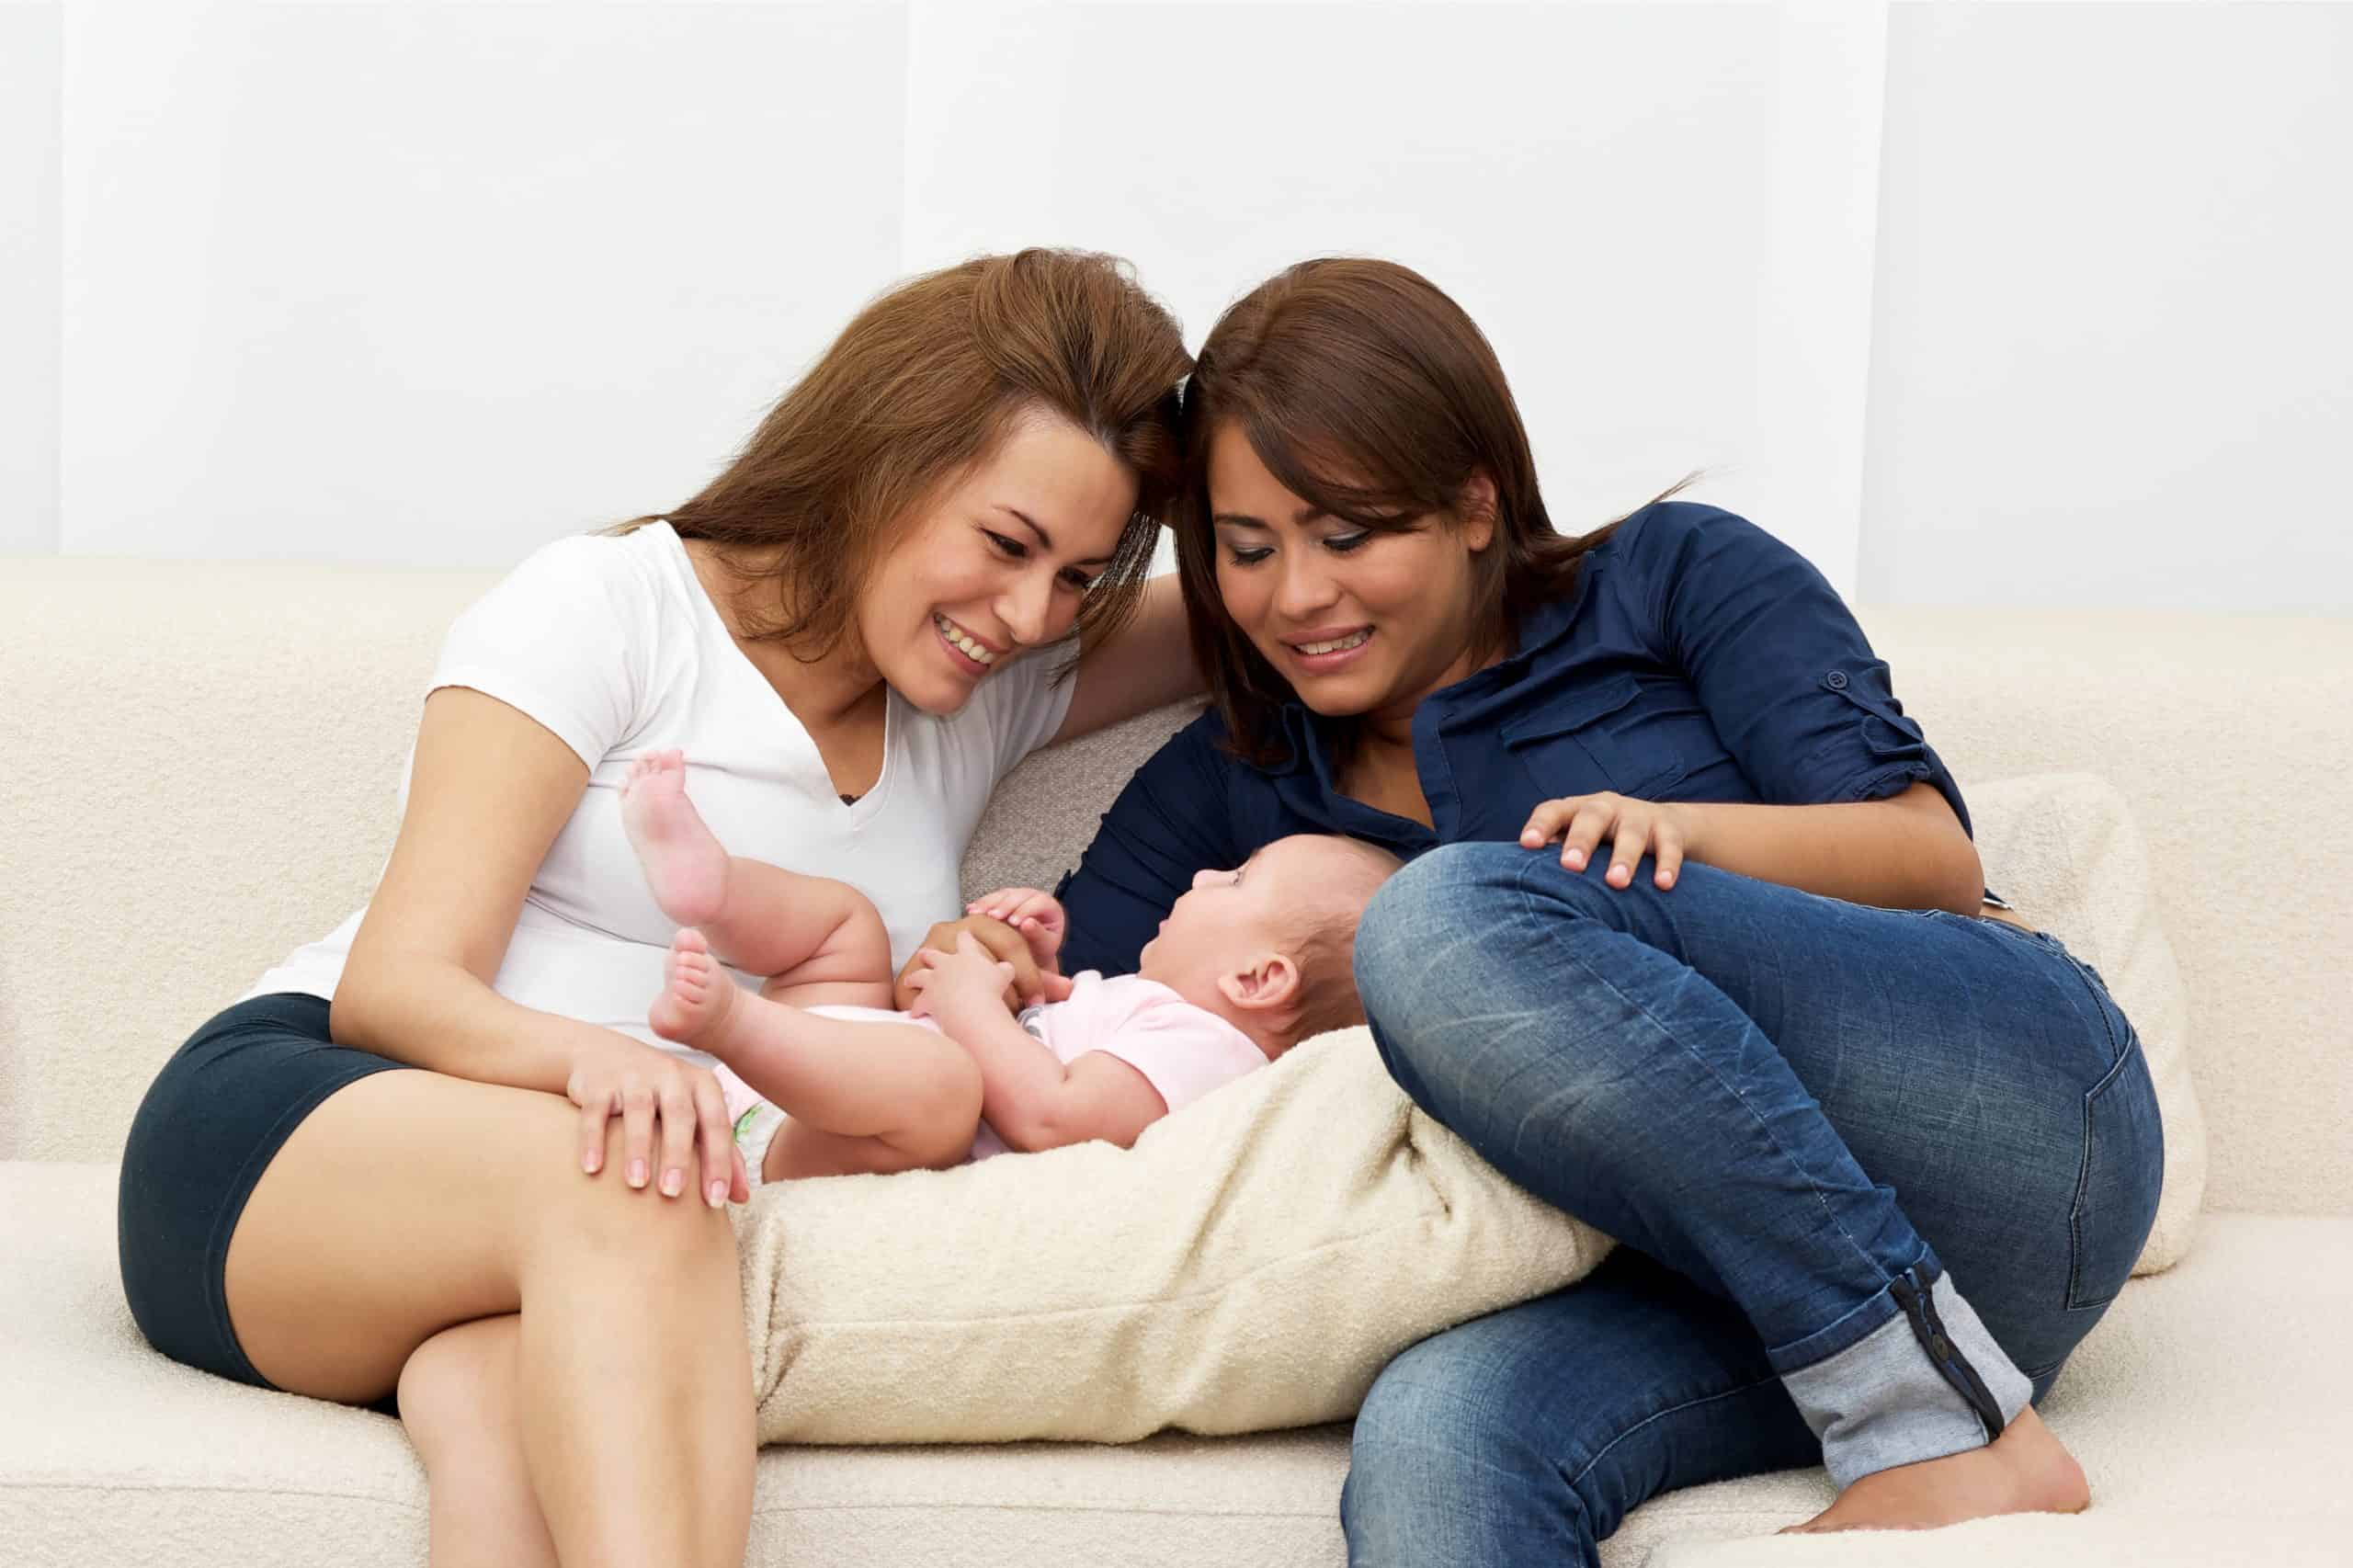 Two women on a couch with their baby.